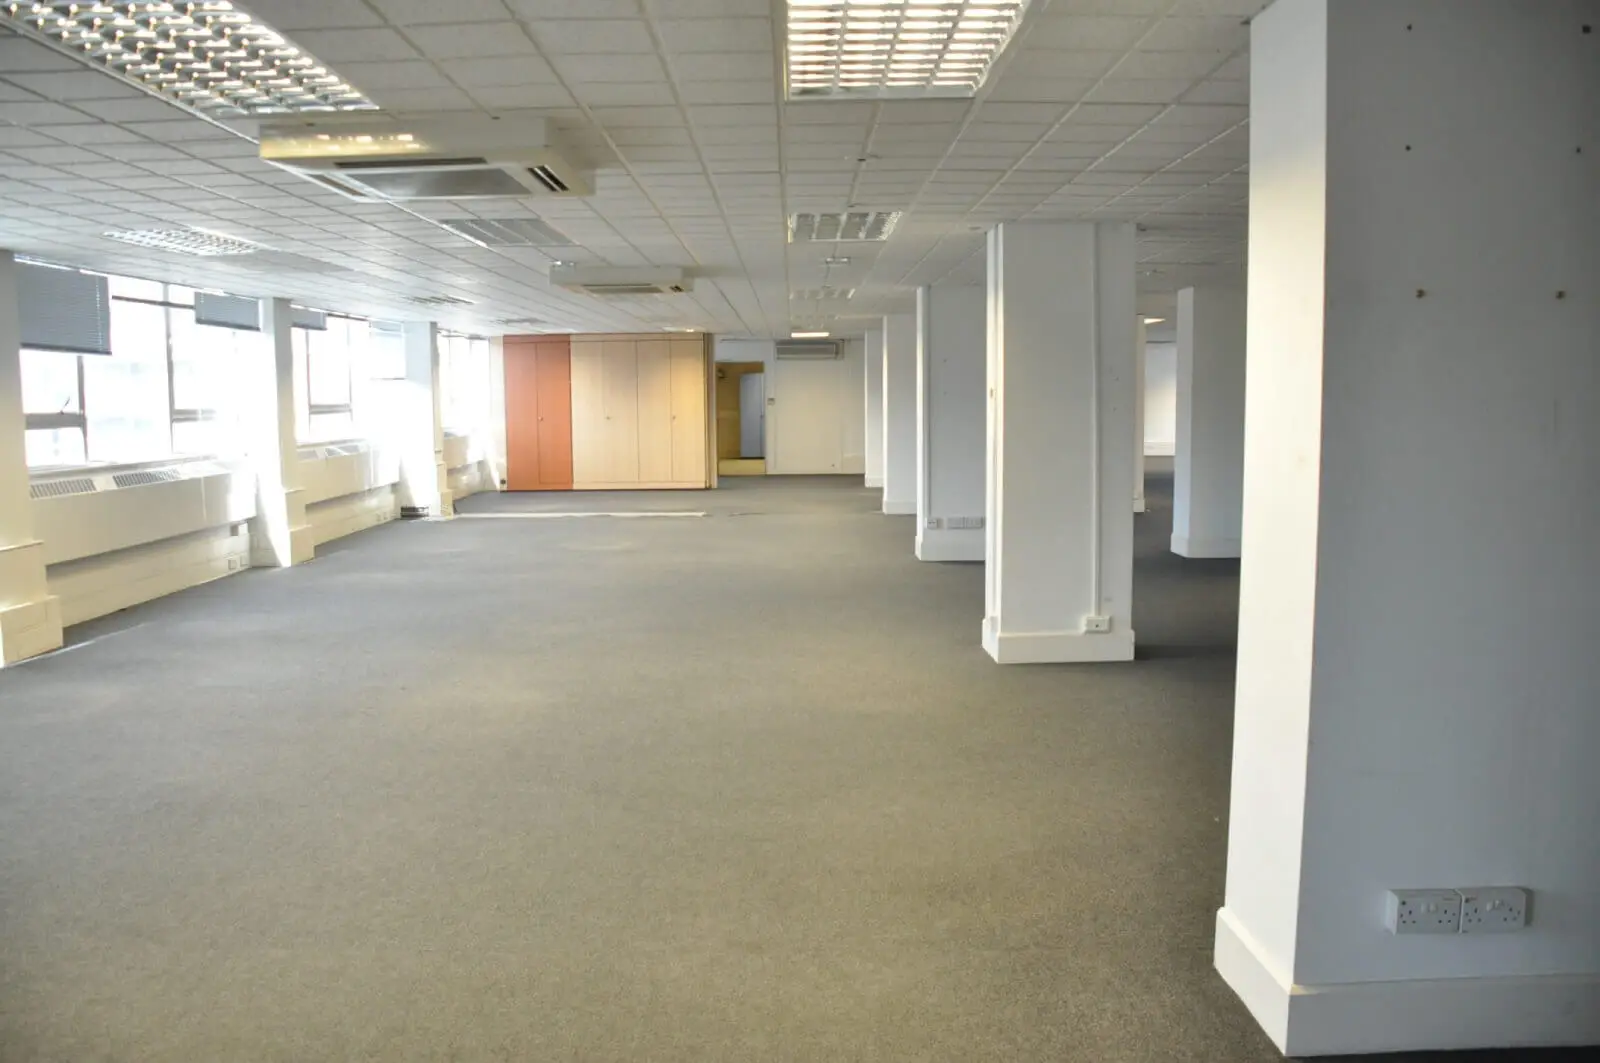 landau morely office design and refurbishment with single glazed glass partitions and furniture 11